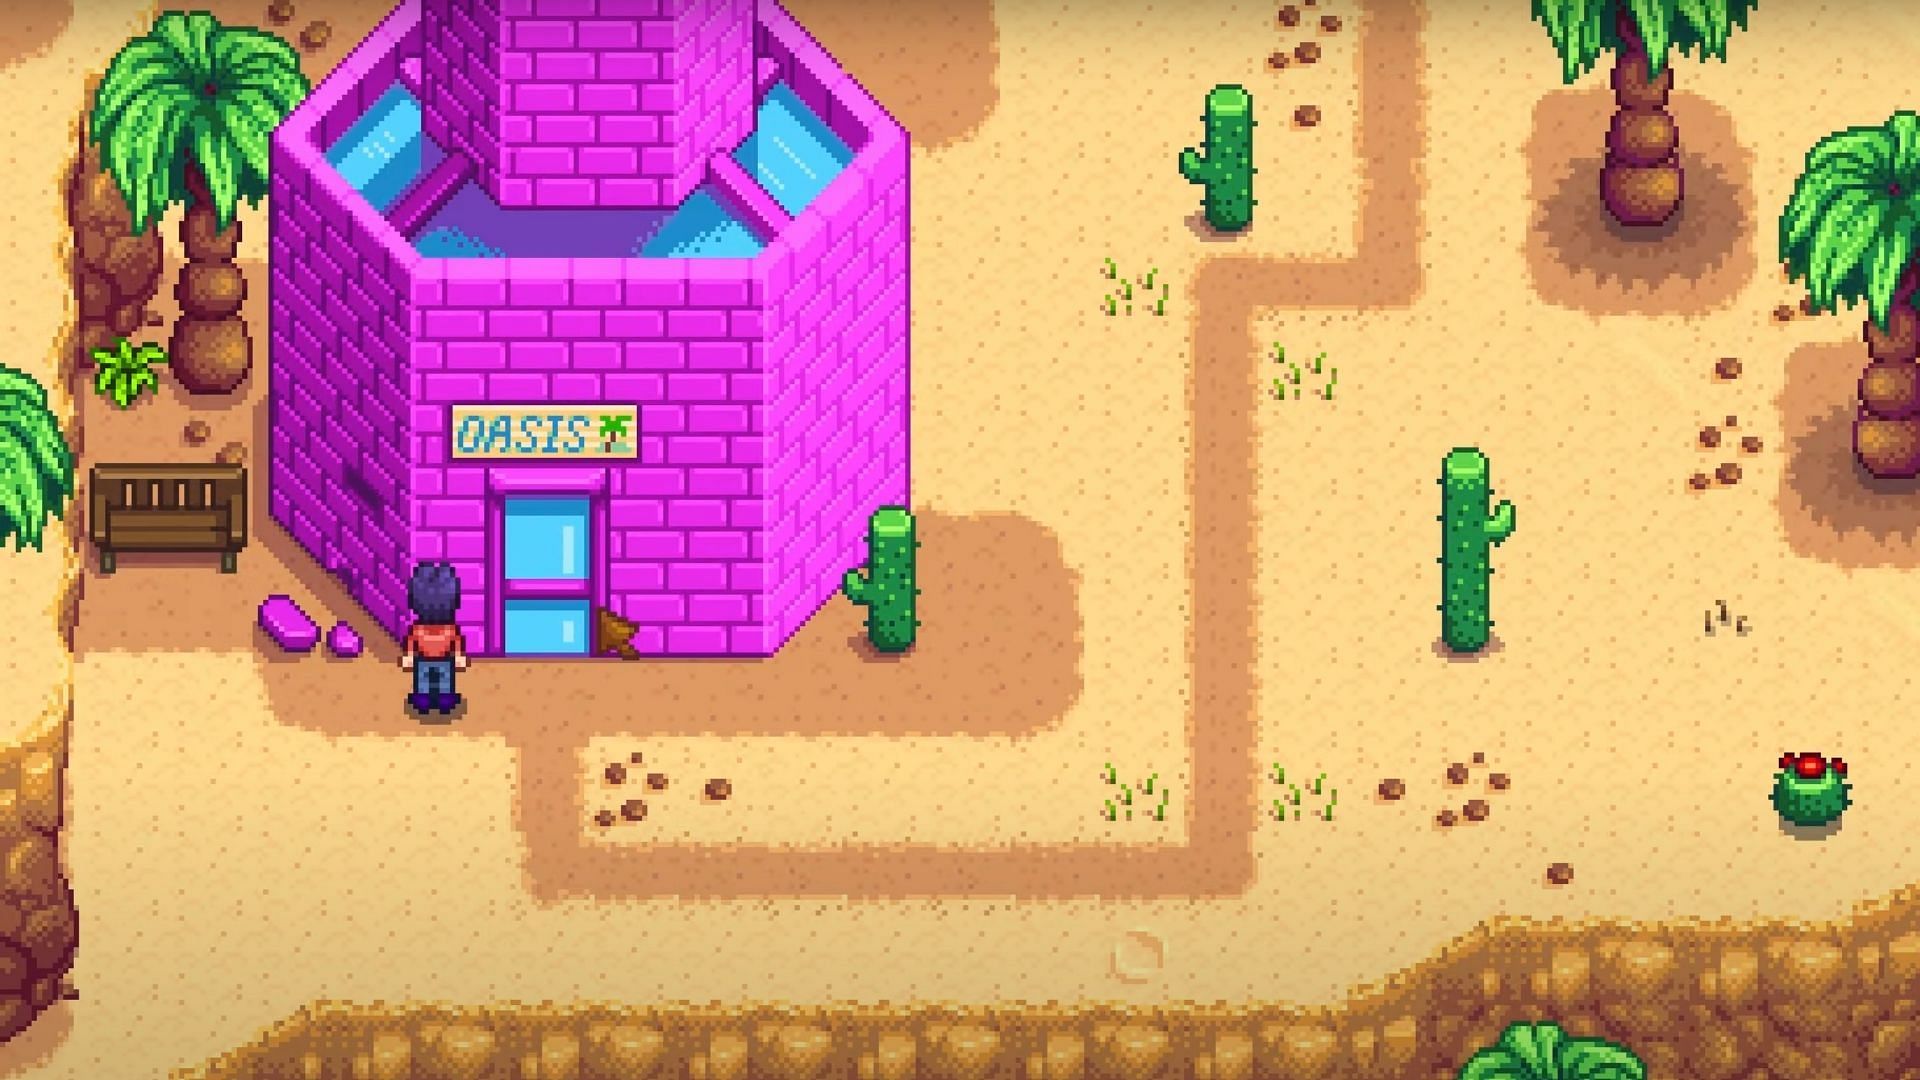 Starfruit seeds can be purchased from Sandy at the Oasis (Image via ConcernedApe || YouTube/@Ubisen Games)